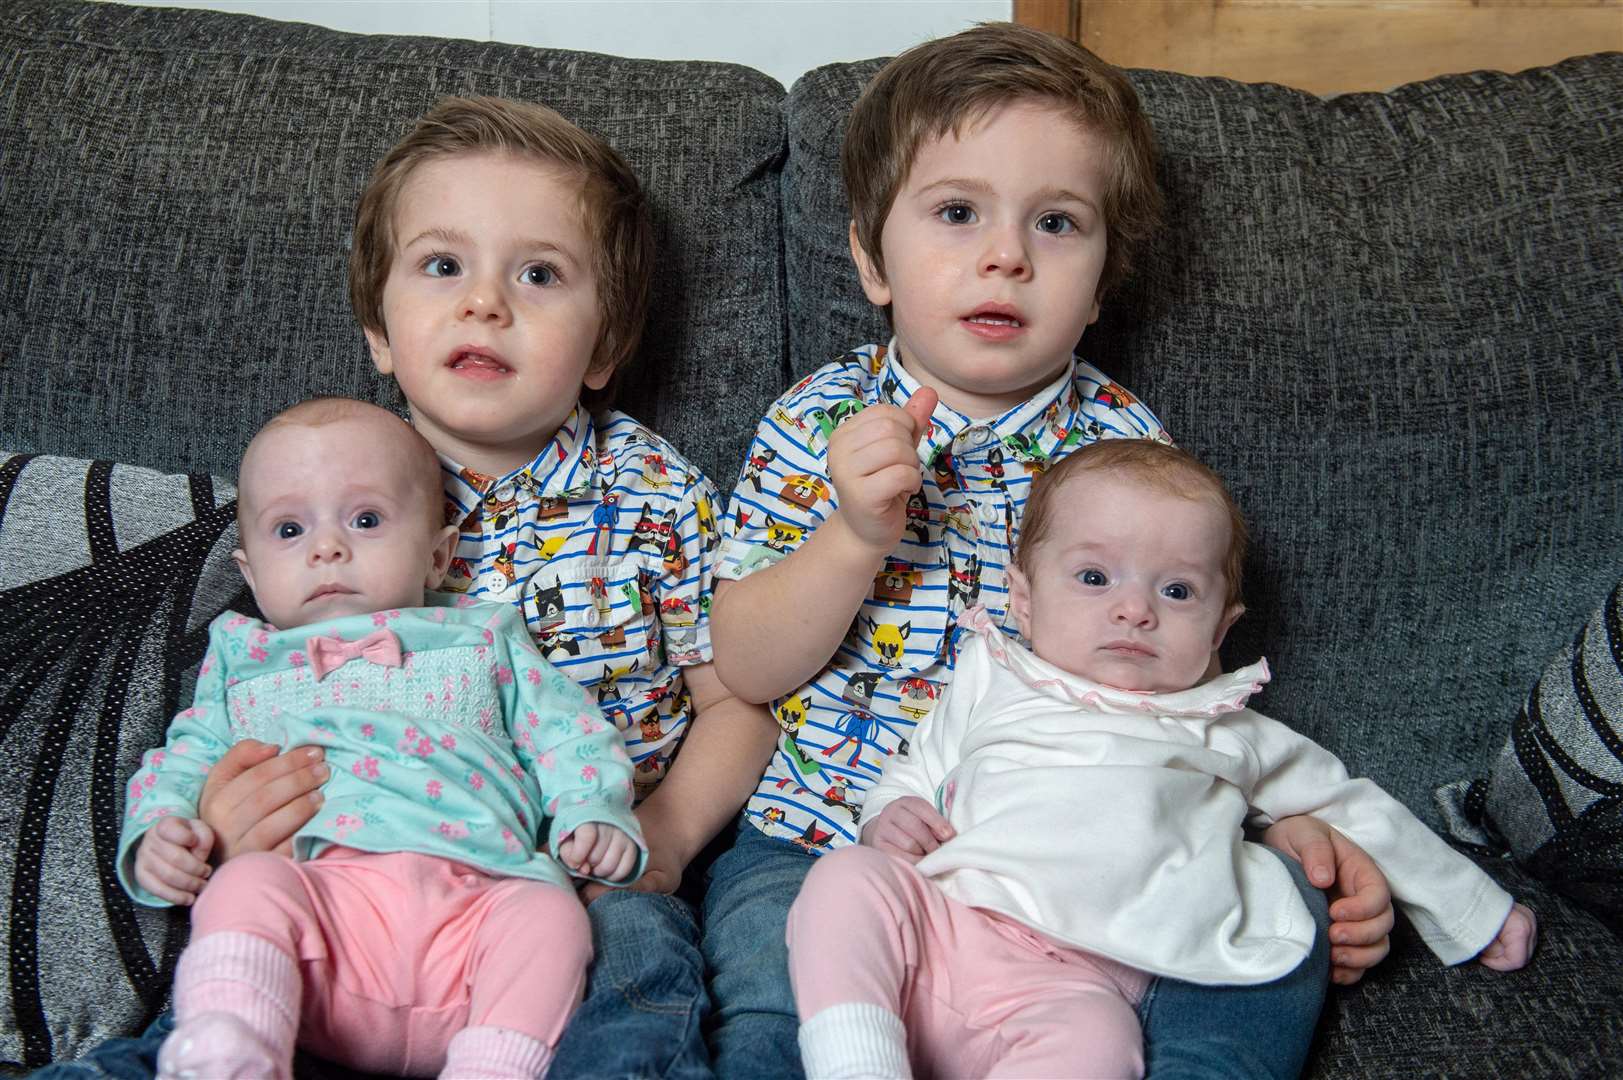 Two-year-old twins Harry and Elijah with their twin siblings Phoebe and Aria. Picture: SWNS